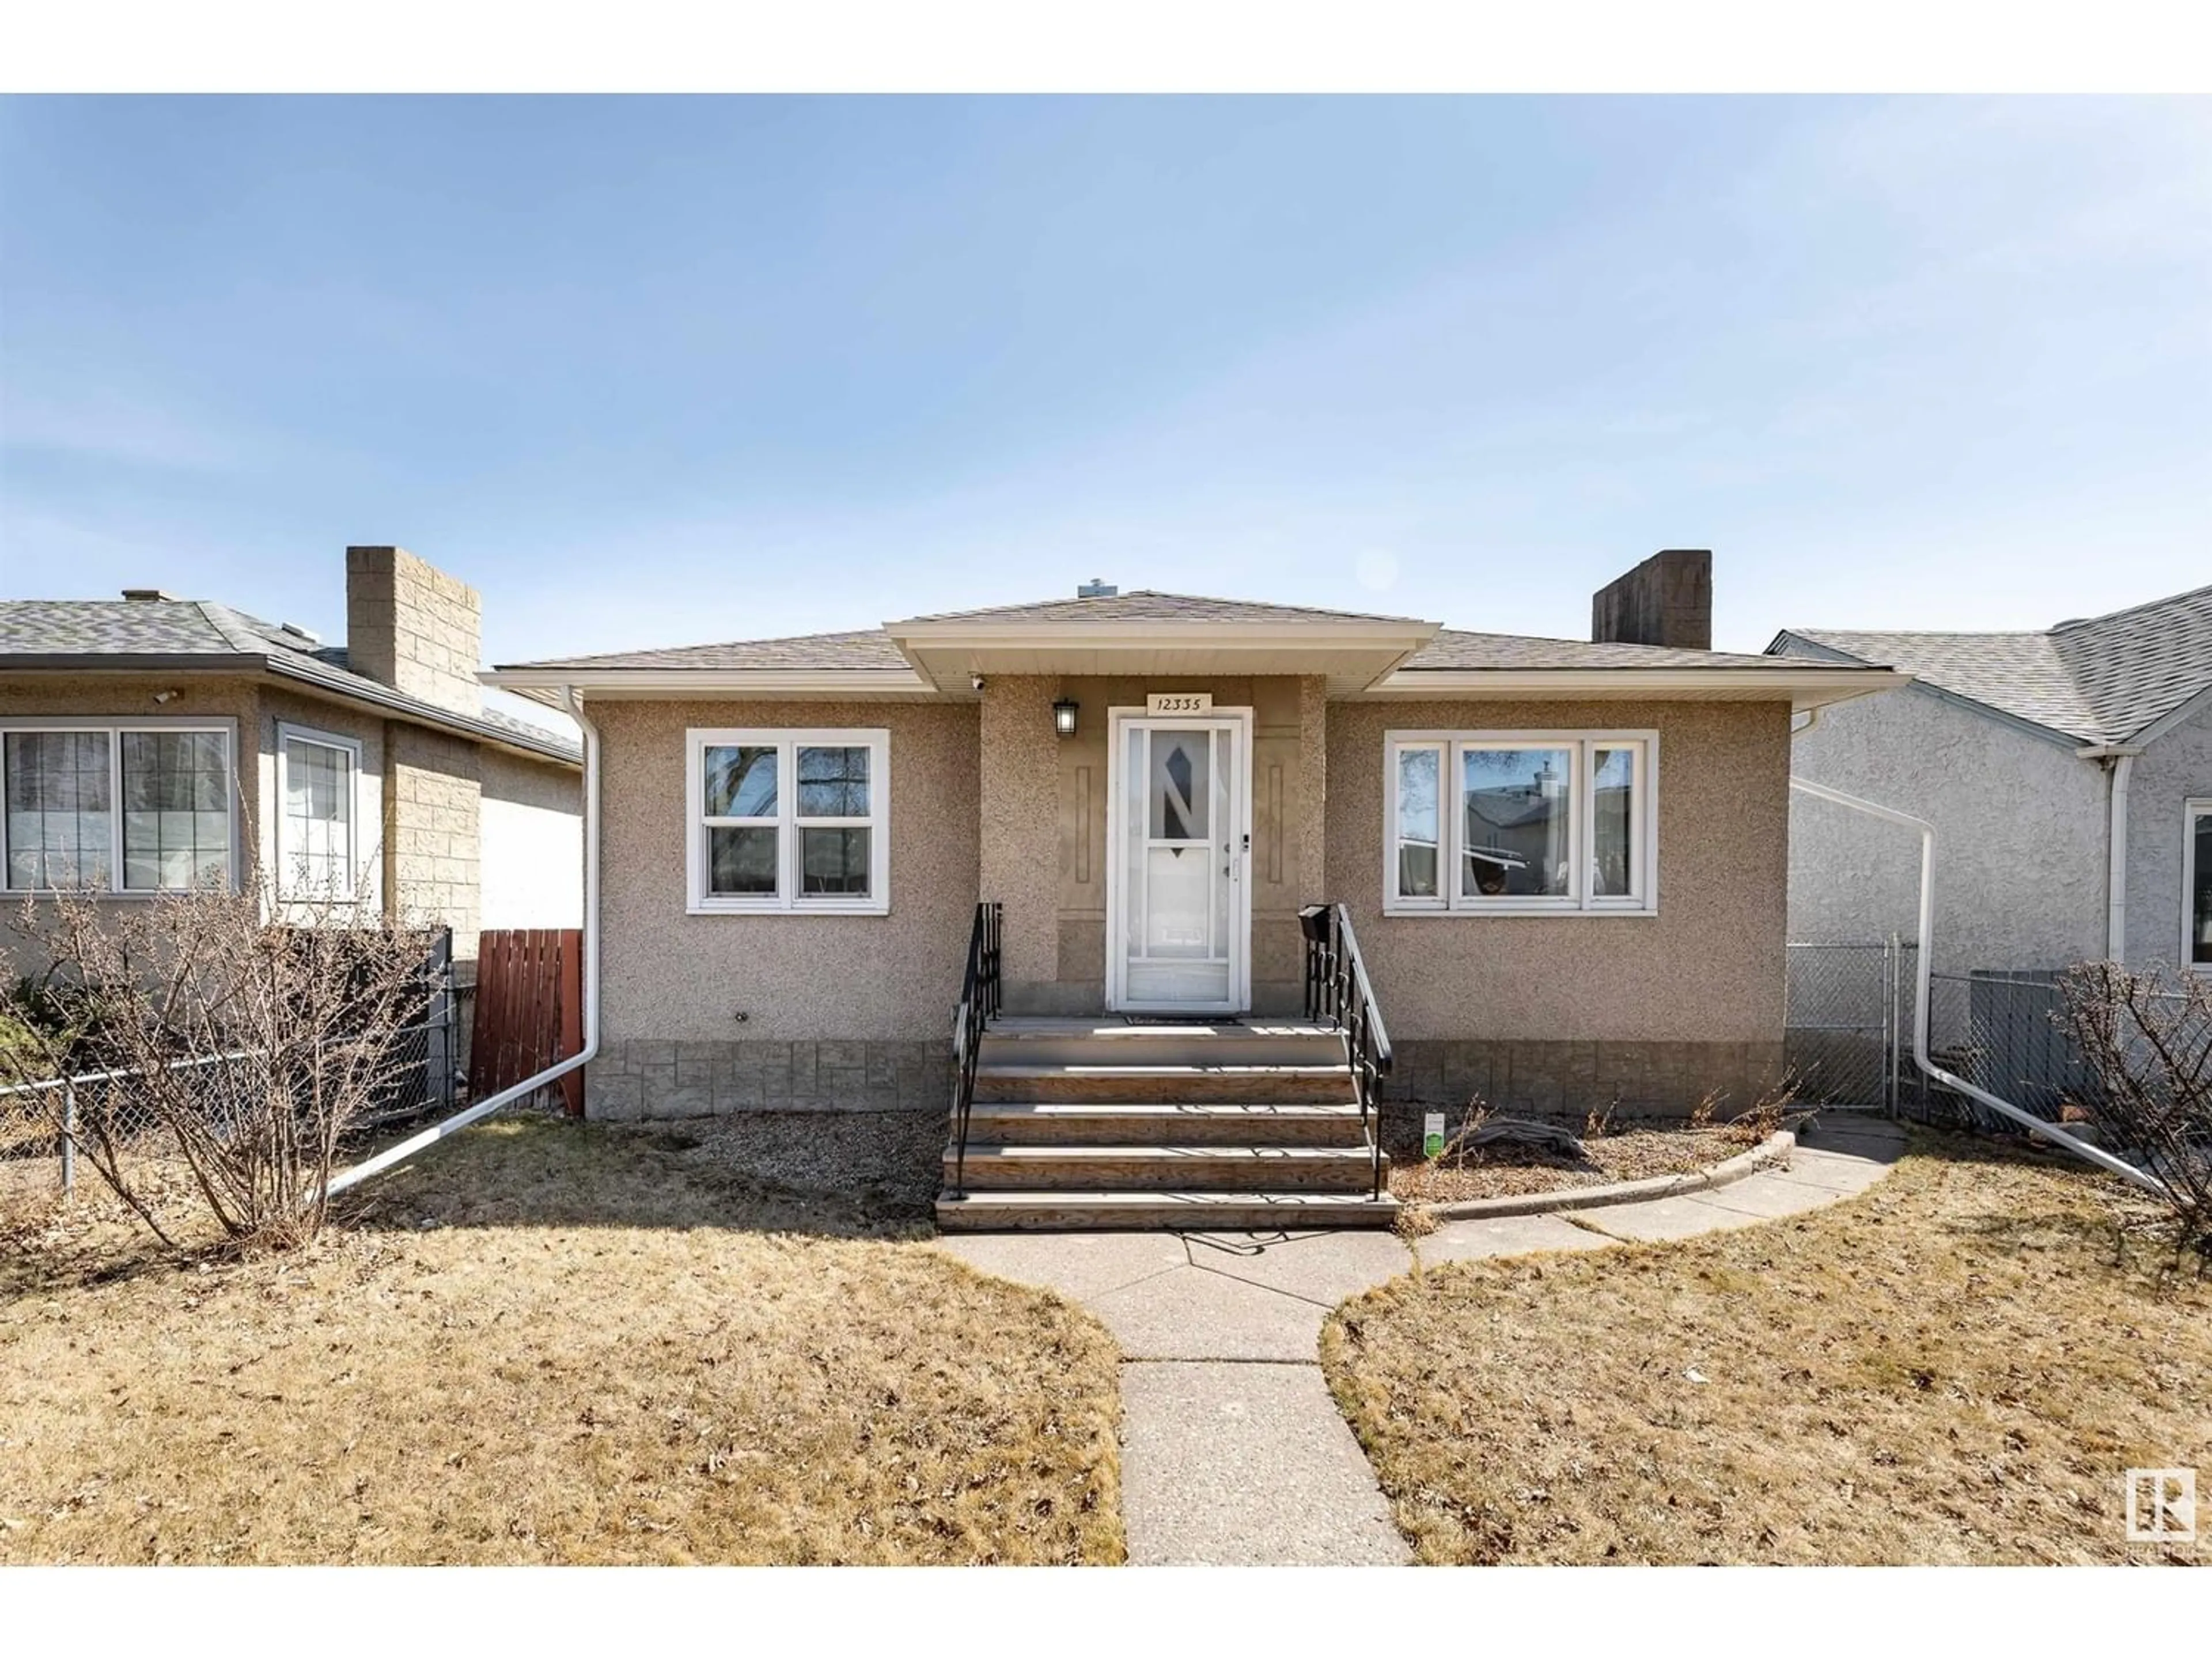 Frontside or backside of a home for 12335 93 ST NW, Edmonton Alberta T5G1G3